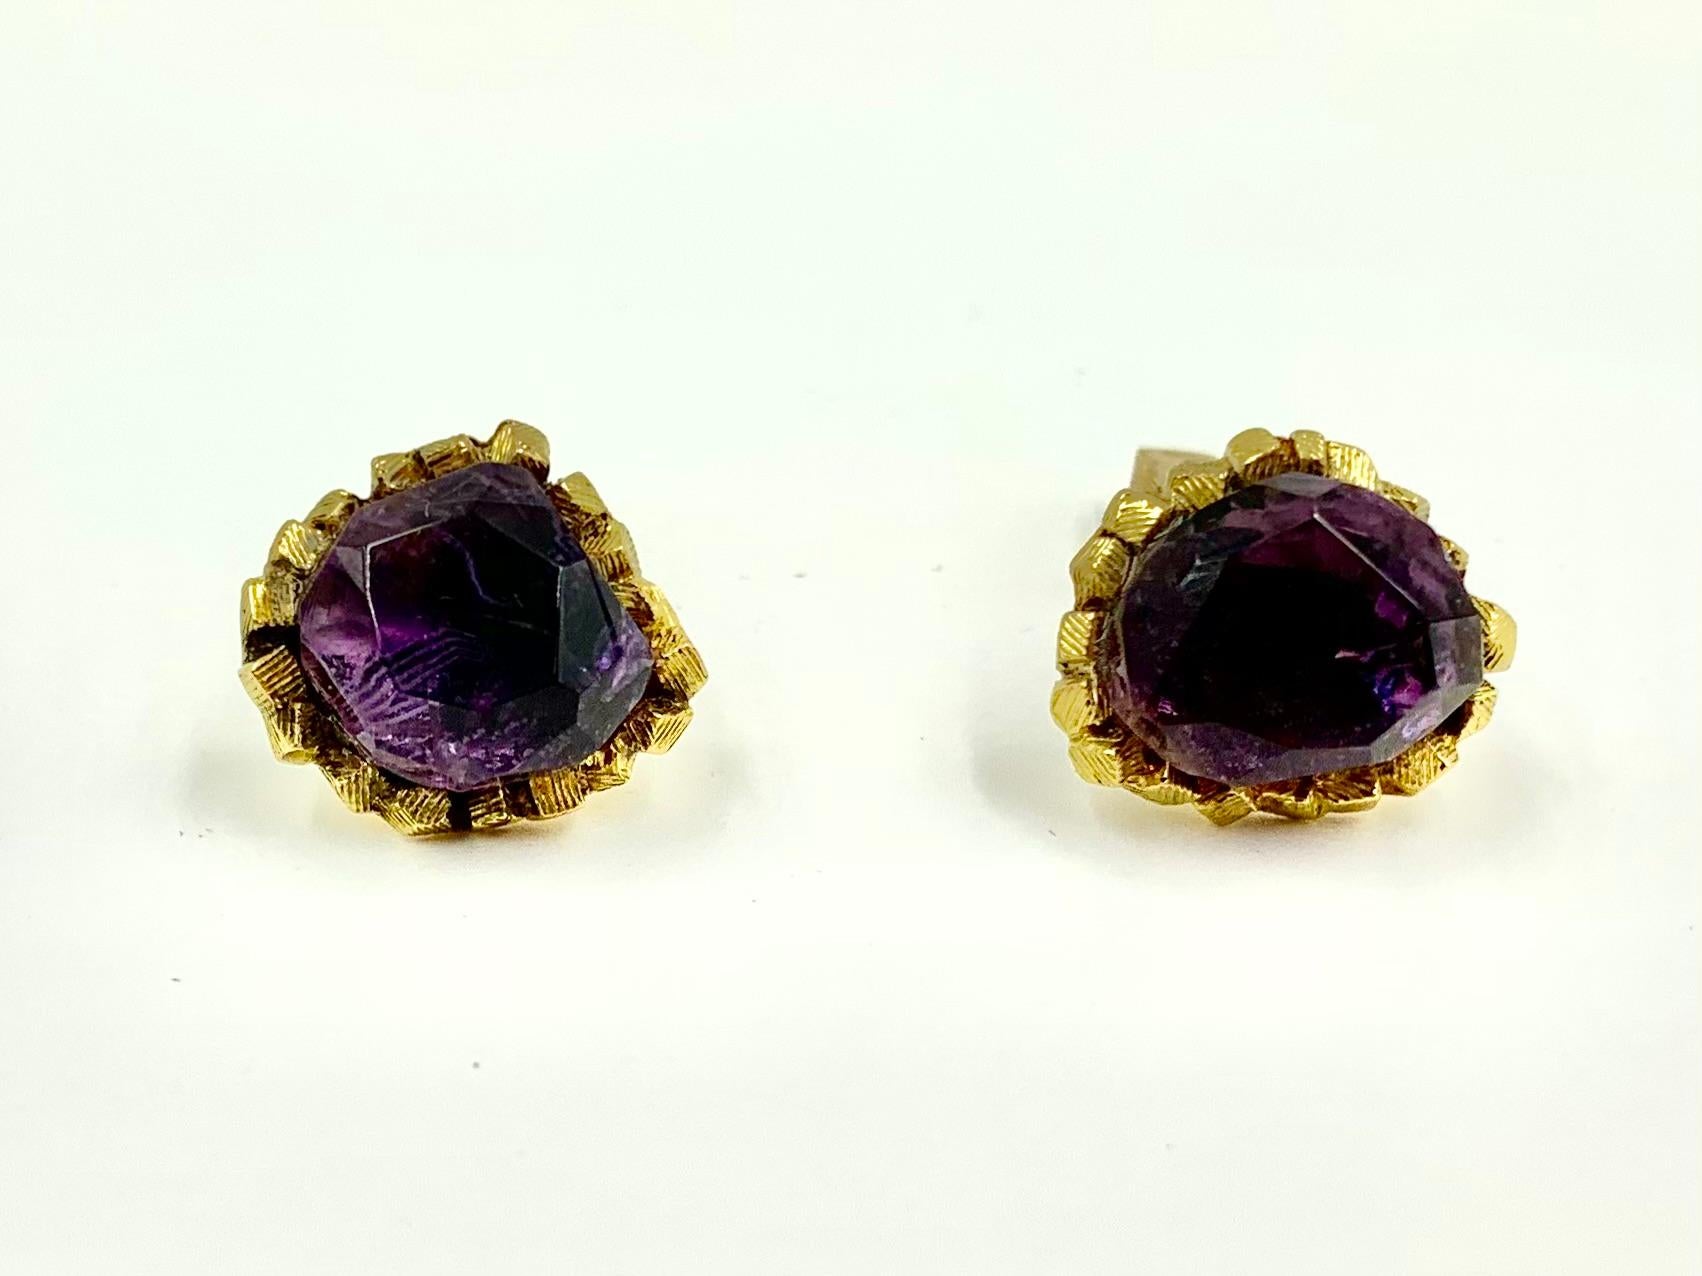 John Donald 18K Gold Organic Modernist Faceted Amethyst Cufflinks 1960's vintage In Good Condition For Sale In New York, NY